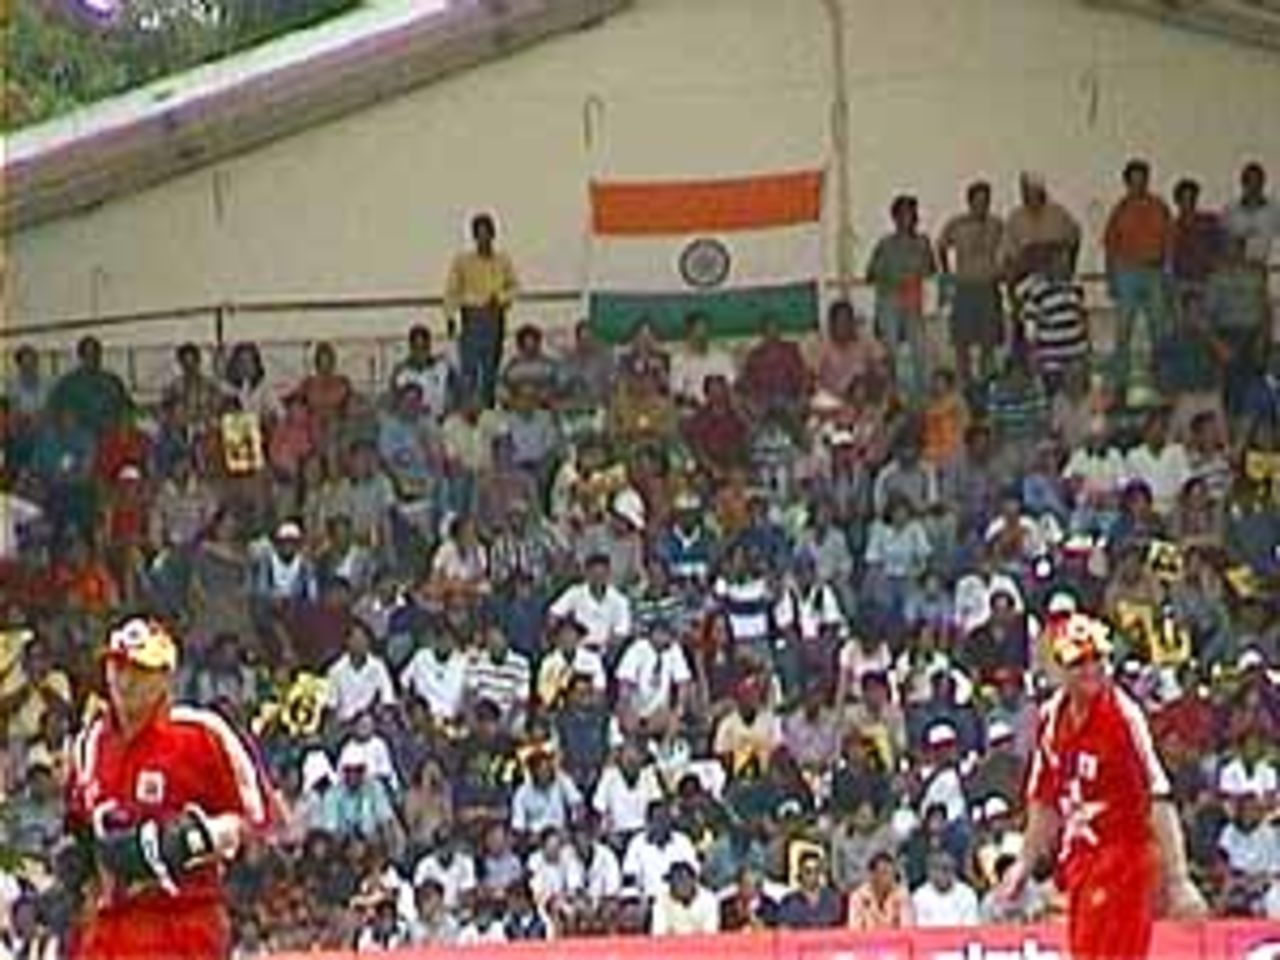 Section of the crowd watching the India-Zimbabwe match. Andy Flower and Alistair Campbell in the foreground, India v Zimbabwe (2nd ODI), Coca-Cola Singapore Challenge, 1999-2000, Kallang Ground, Singapore, 4 Sep 1999.